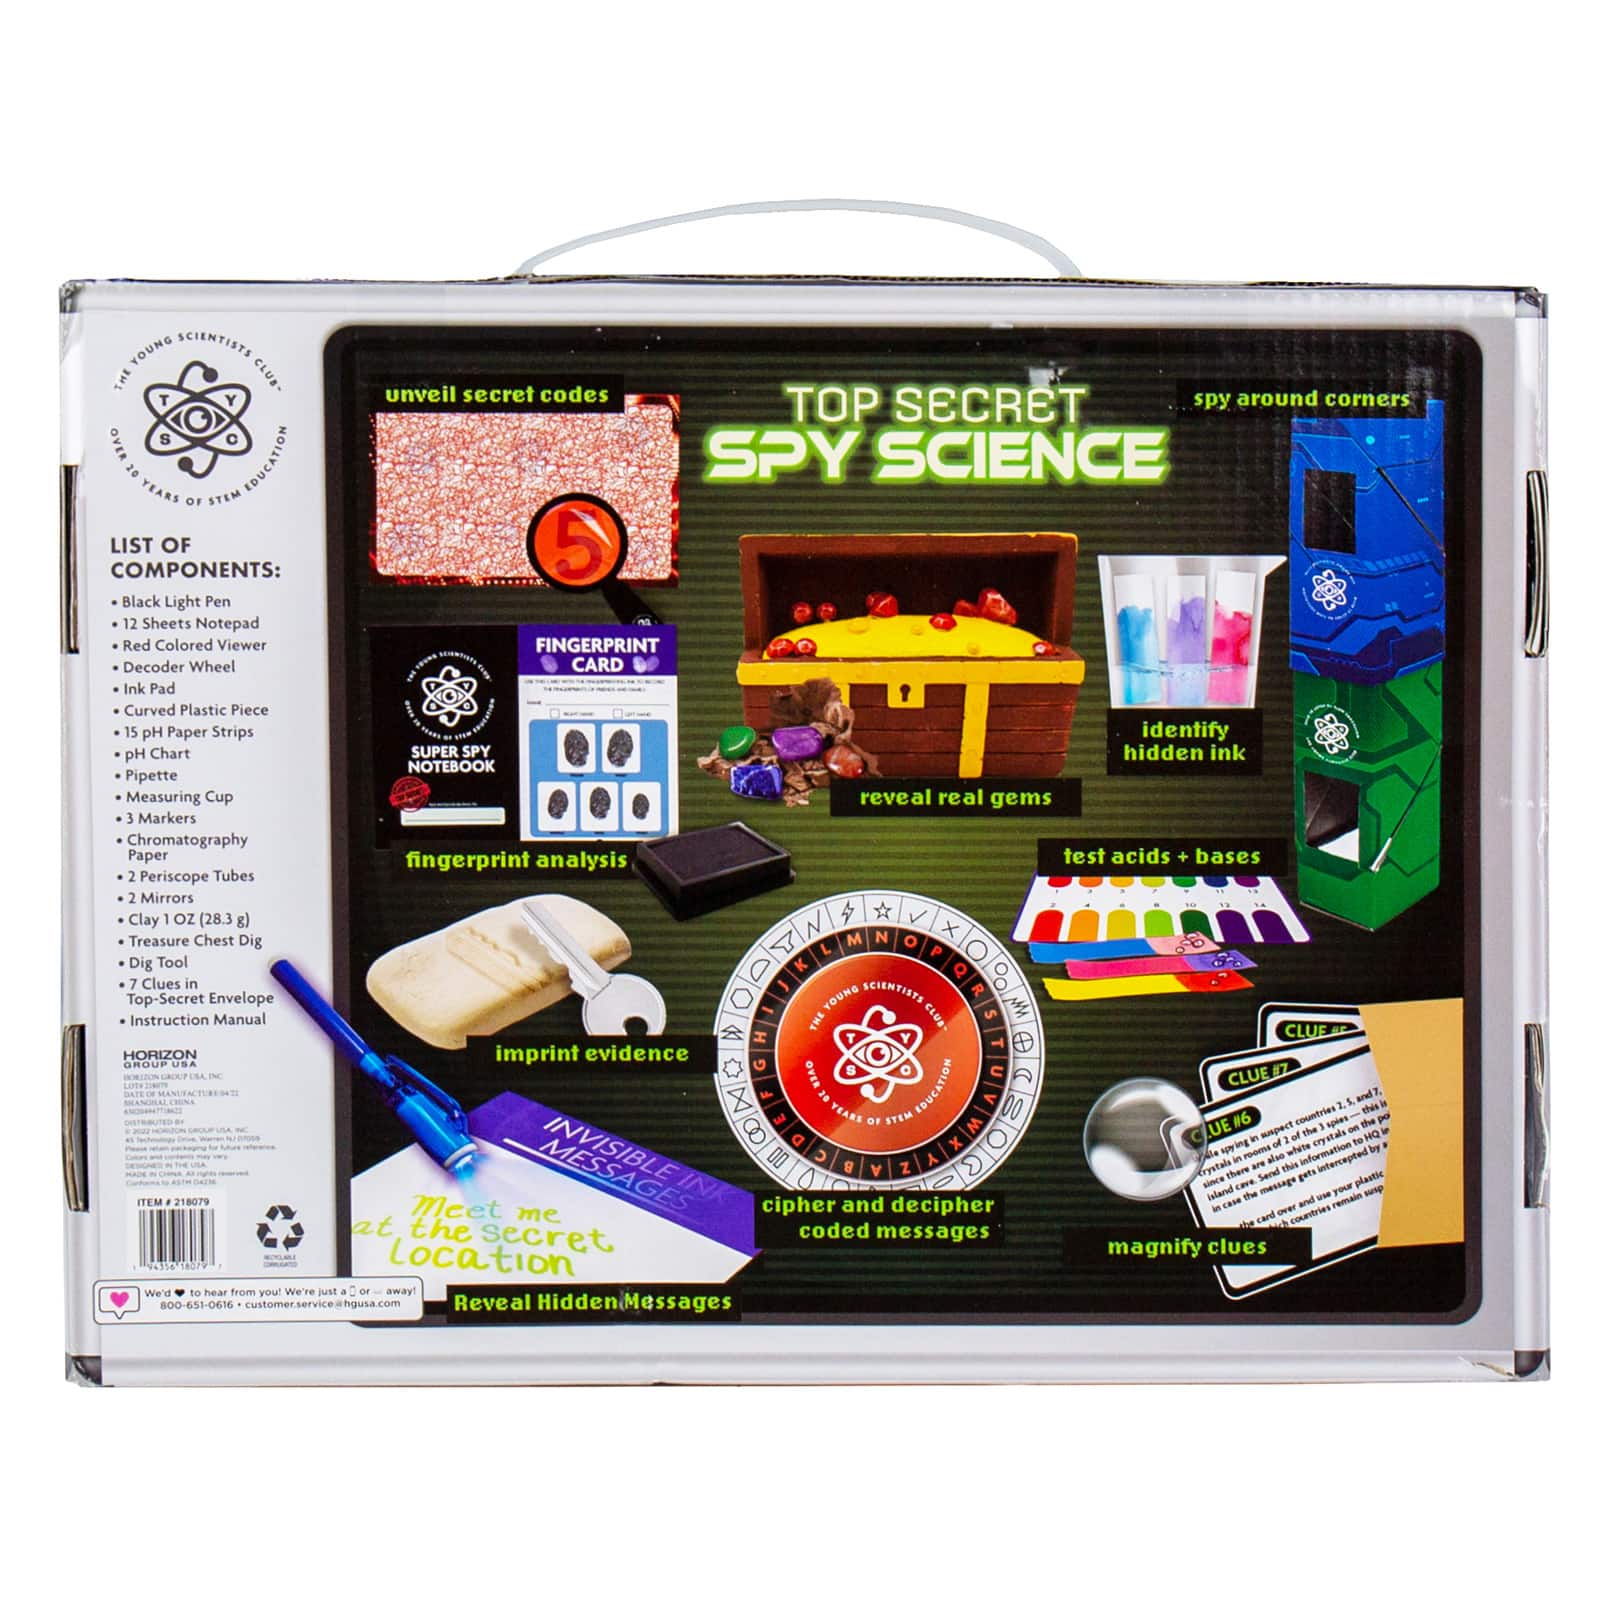 The Young Scientists Club Top Secret Spy Science Kit